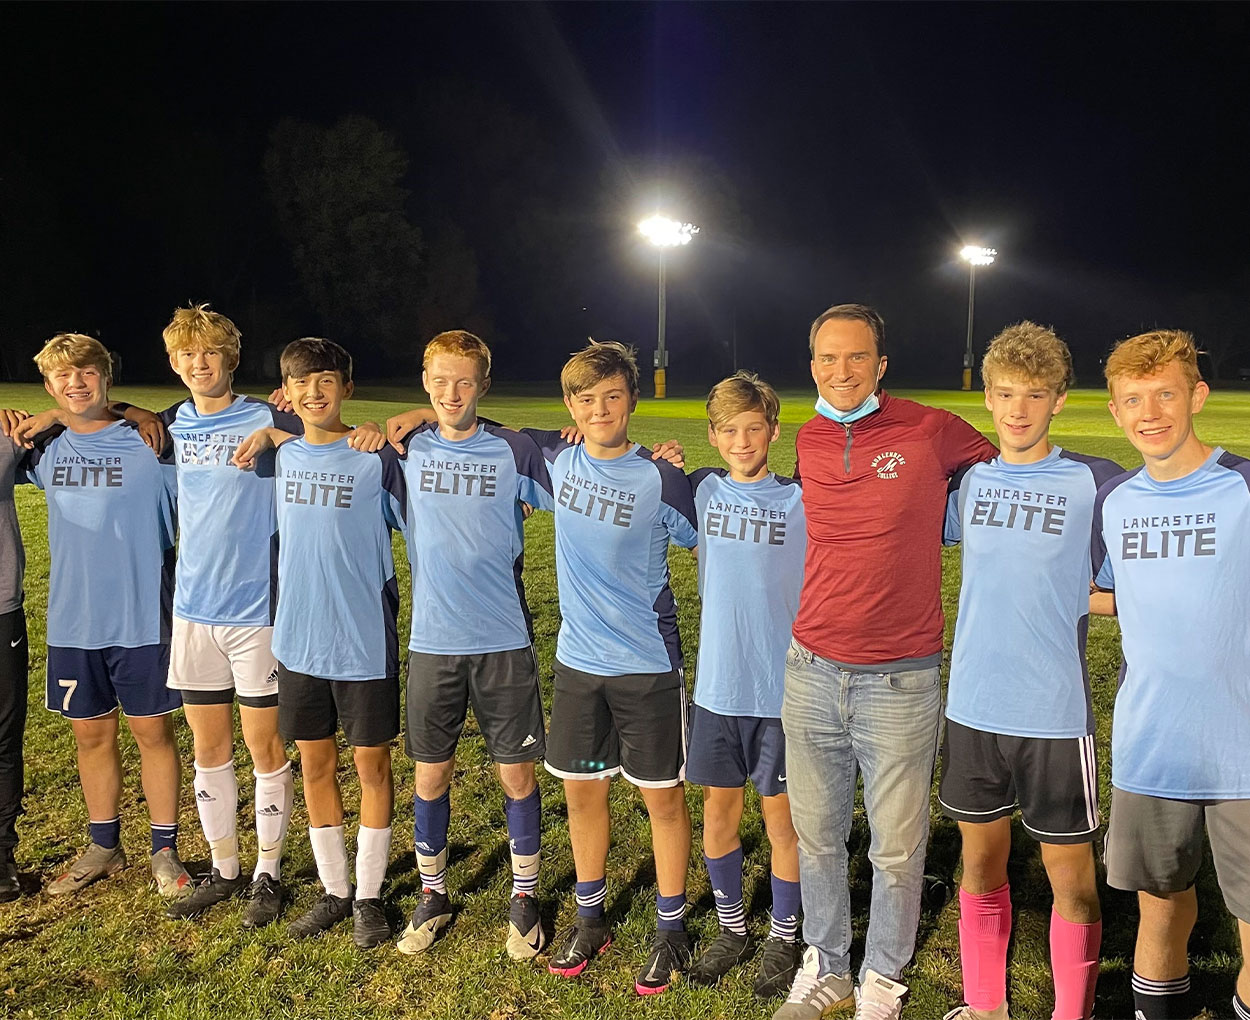 An adult in a red shirt poses with several teenage athletes in light blue jerseys.